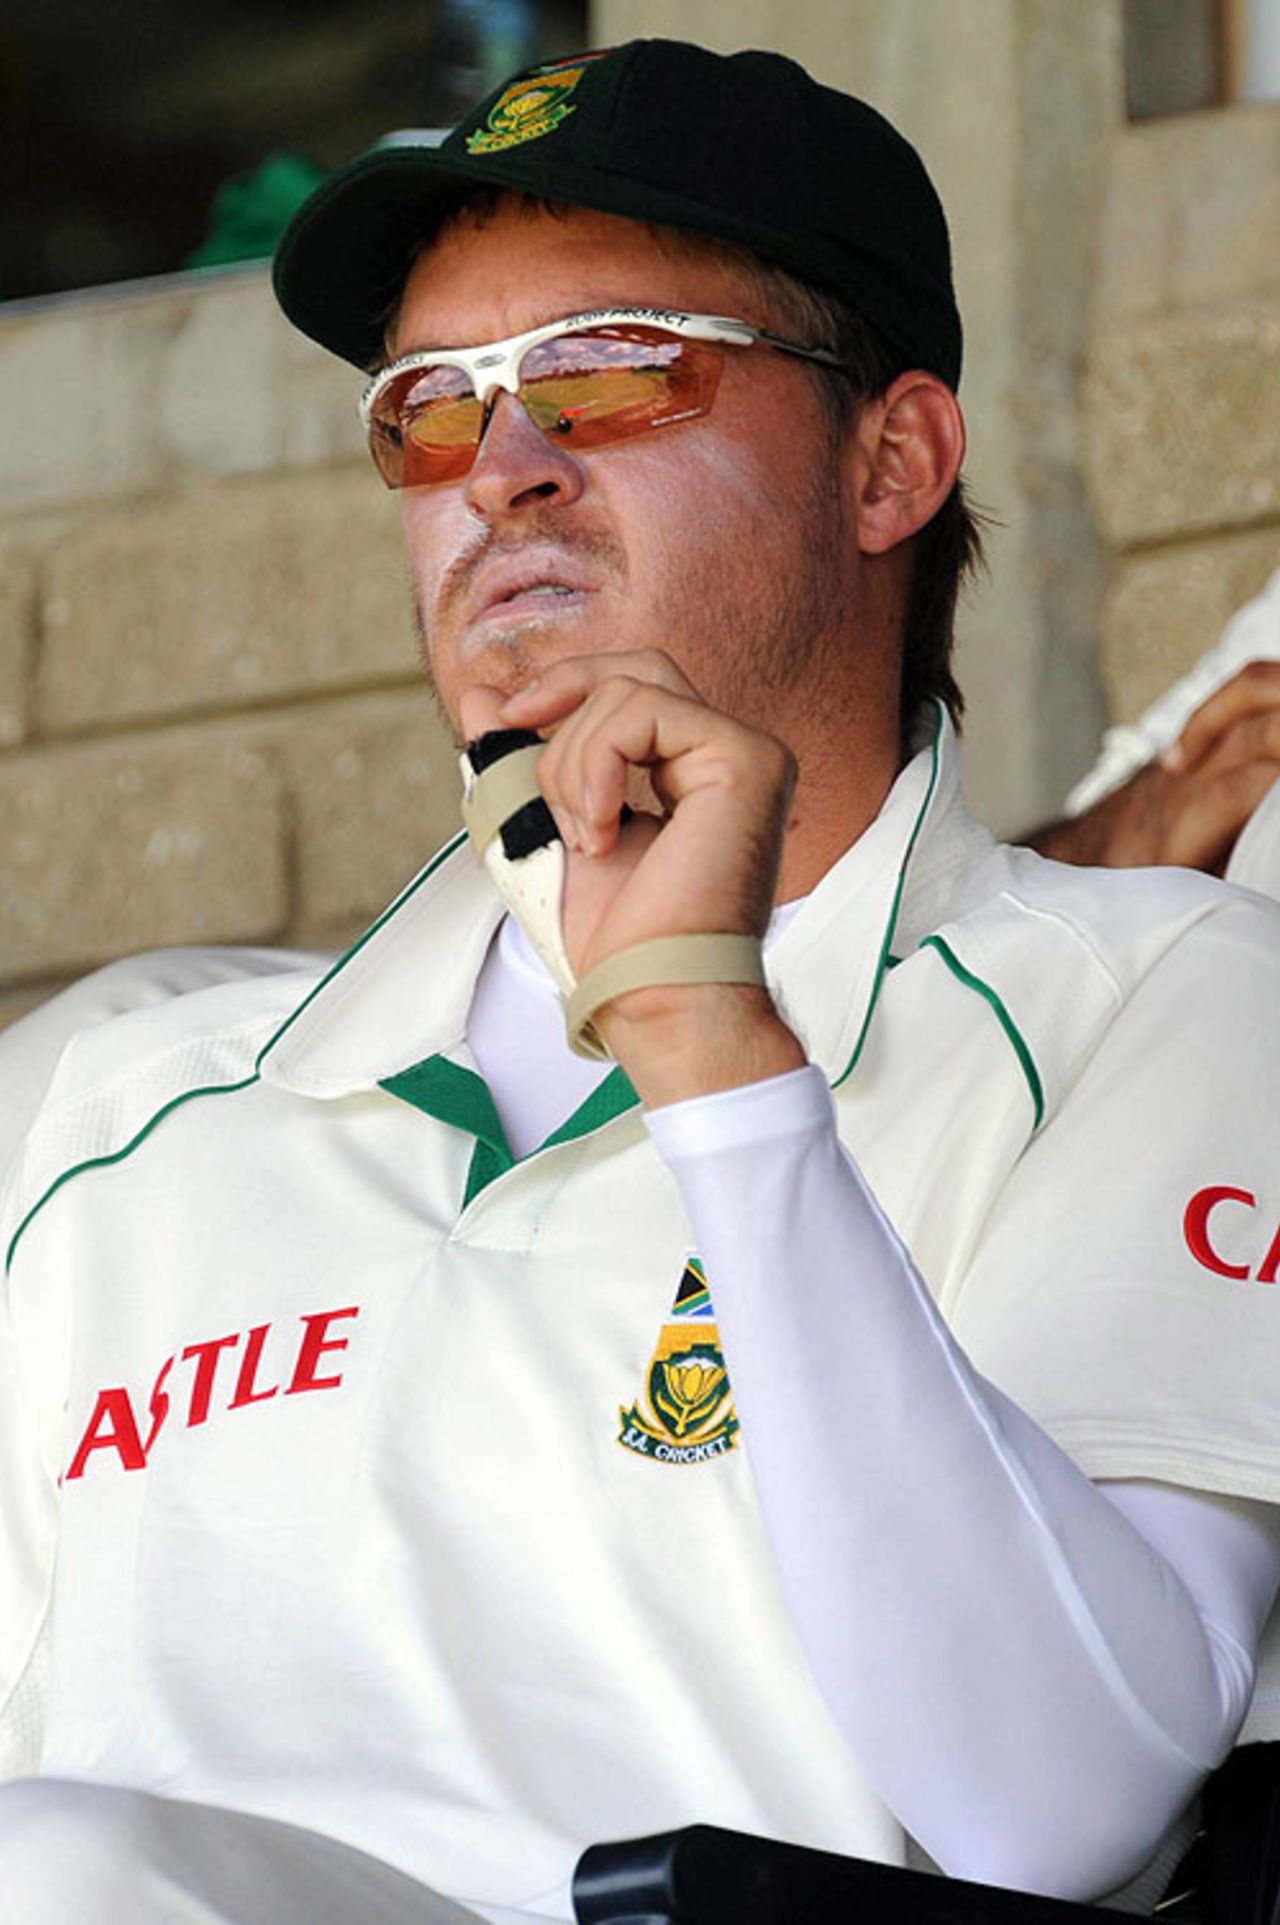 Paul Harris broke his thumb before play on the first day, but still claimed the wicket of Imrul Kayes, South Africa v Bangladesh, 1st Test, Bloemfontein, November 20, 2008